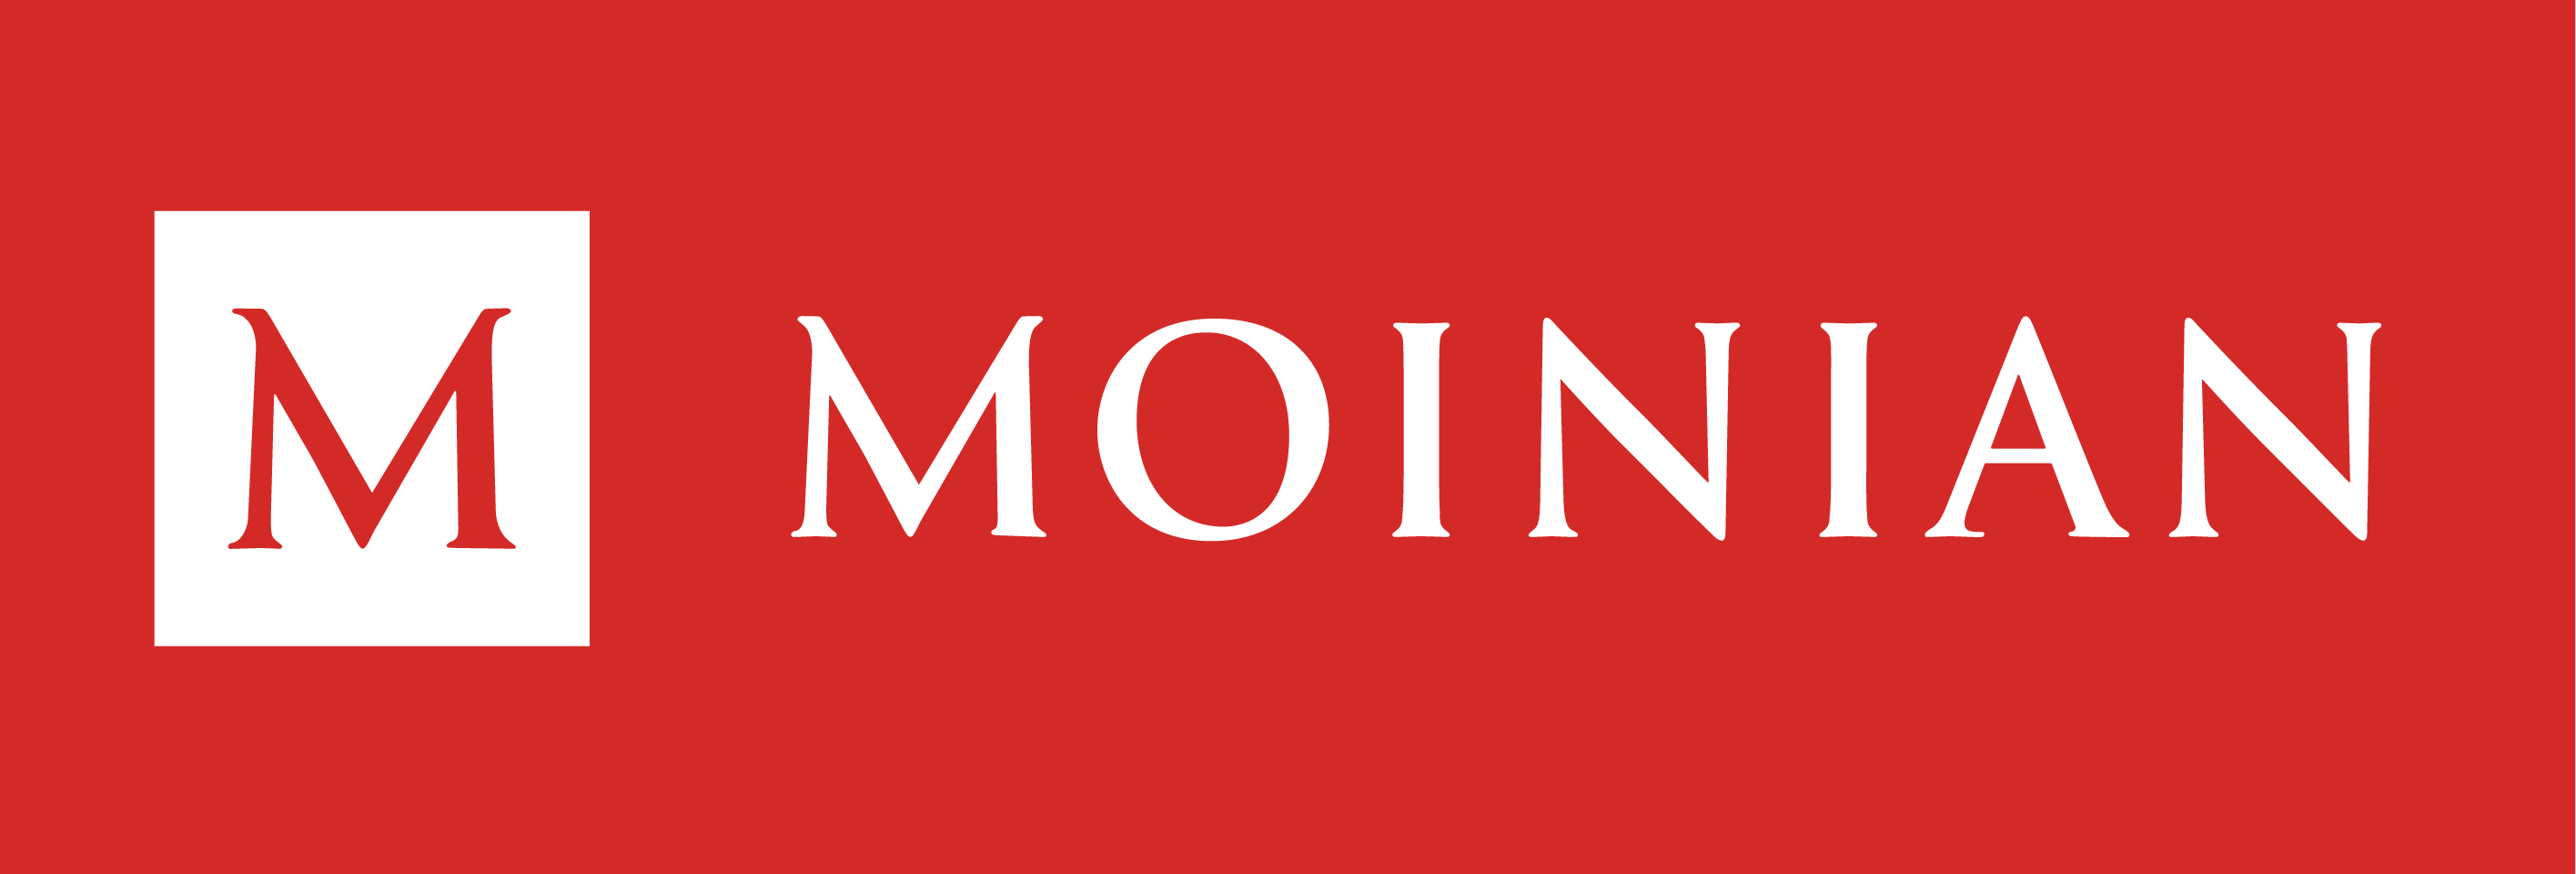 Moinian_Logo_Red_bg.png